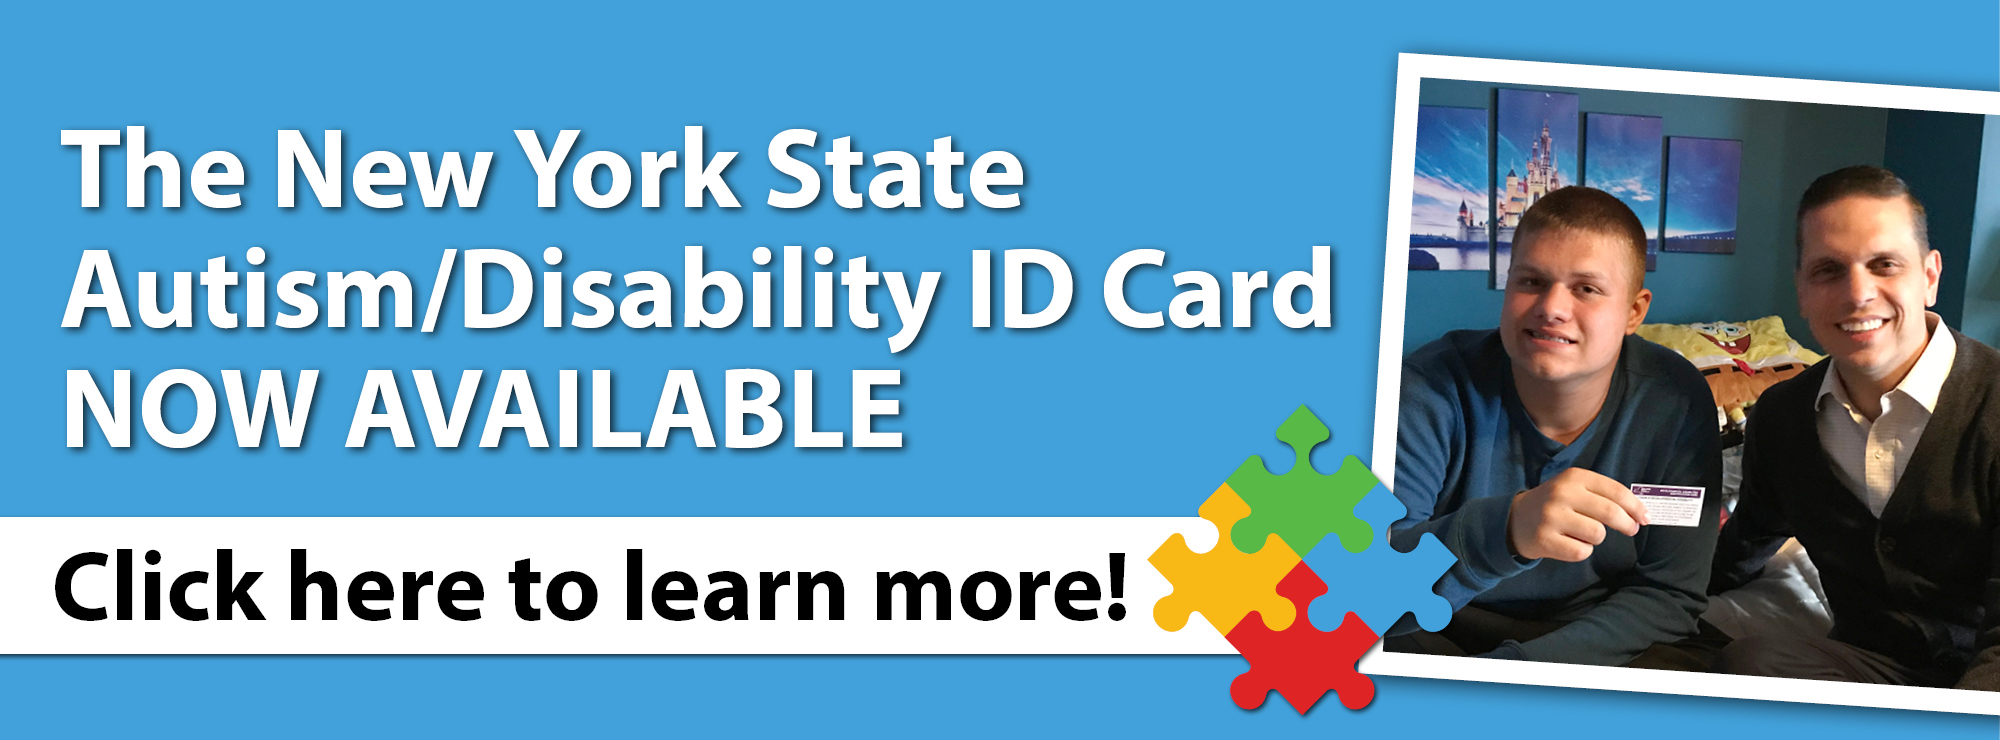 NYS Autism/Disability ID Card